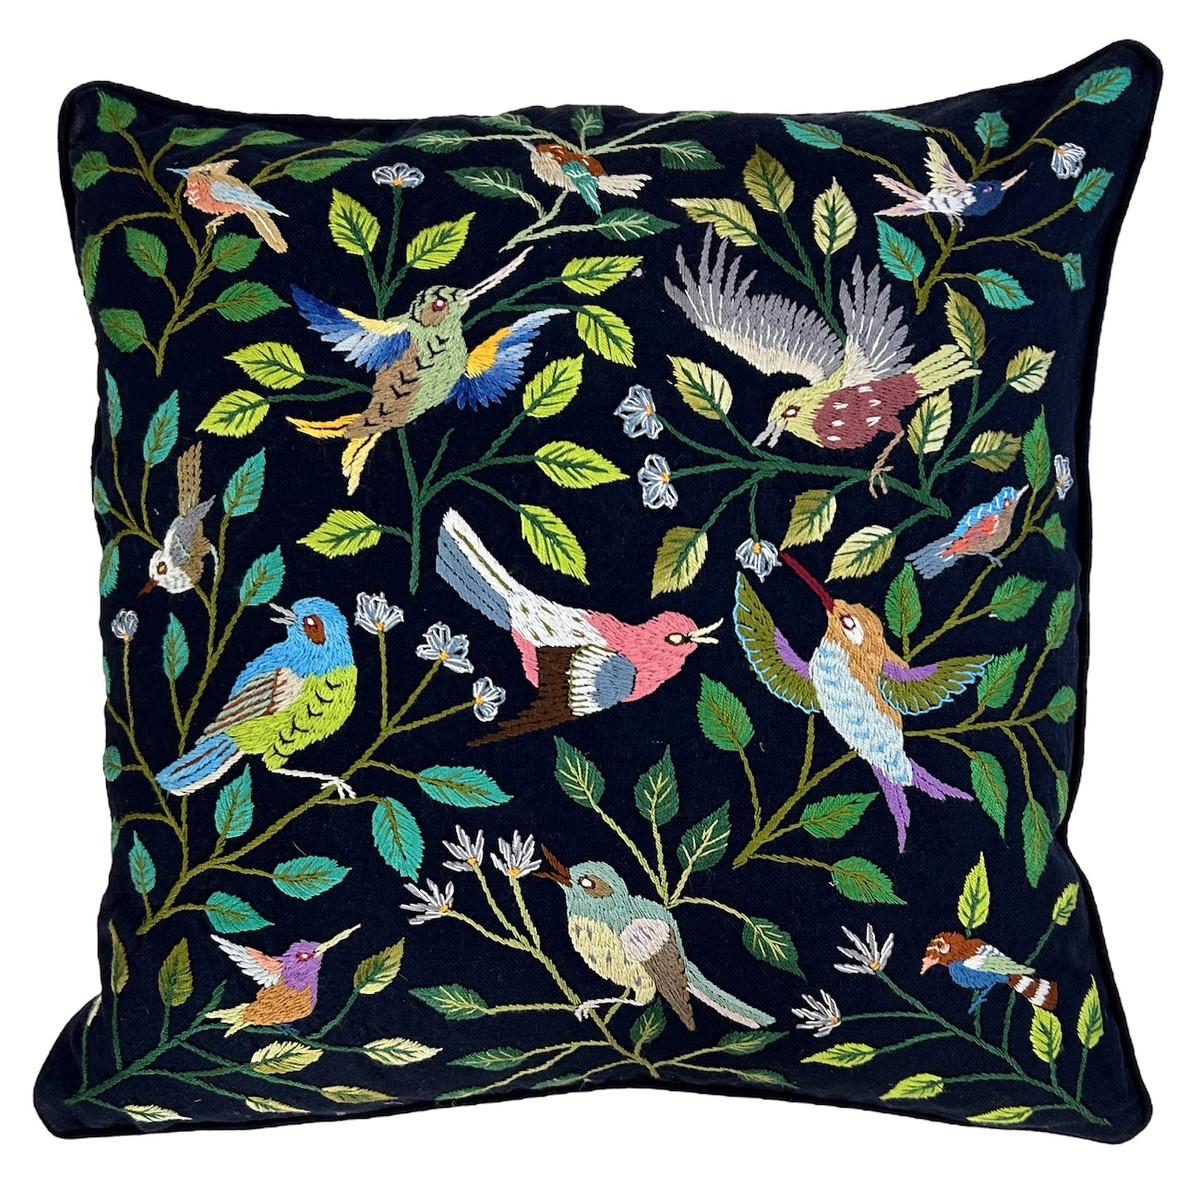 Handwoven cotton pillow with hand embroidery by Maria, one of the talented embroidery artists of Santiago Atitlan. The detailed embroidery is birds with branches, leaves and flowers on a deep indigo blue handwoven cotton cloth. The back is the same handwoven cloth. Rolled piping is linen. Colors of embroidery- greens, blues, pink, grey, violet, white, tobacco and more.  Hidden zipper with 90-10 feather/down pillow insert. Read more about the embroidery artists here.
